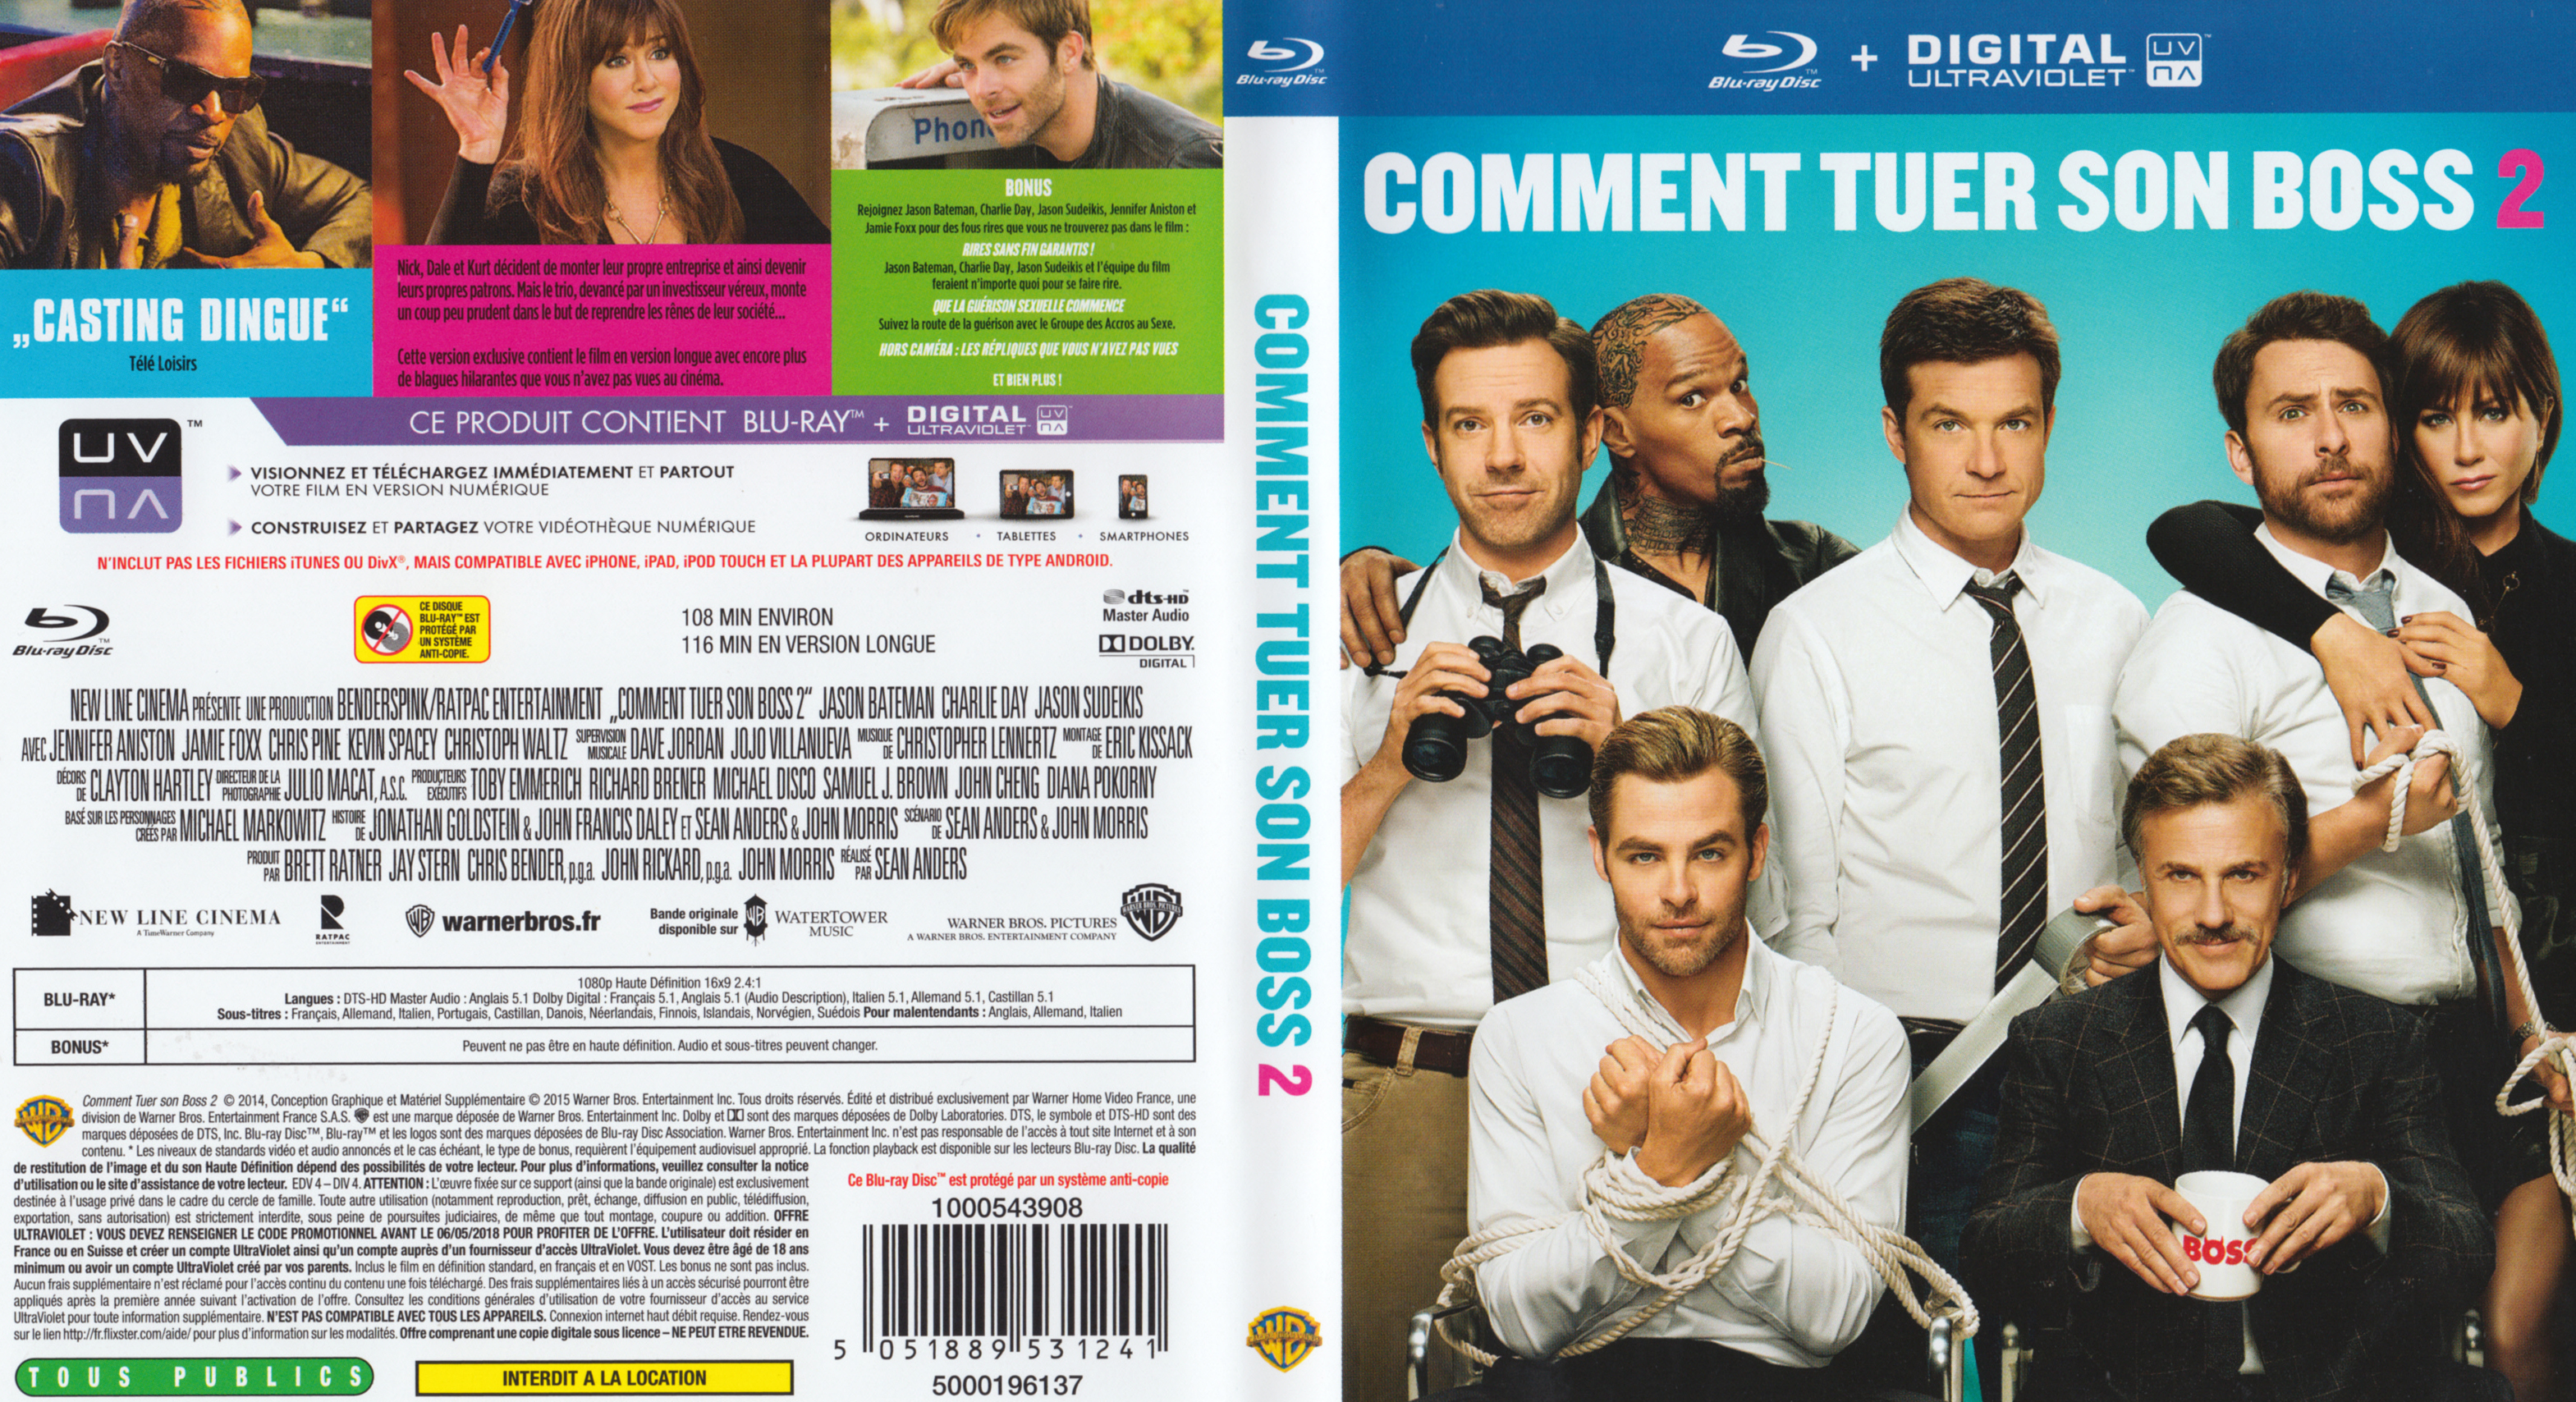 Jaquette DVD Comment tuer son boss 2 (BLU-RAY)